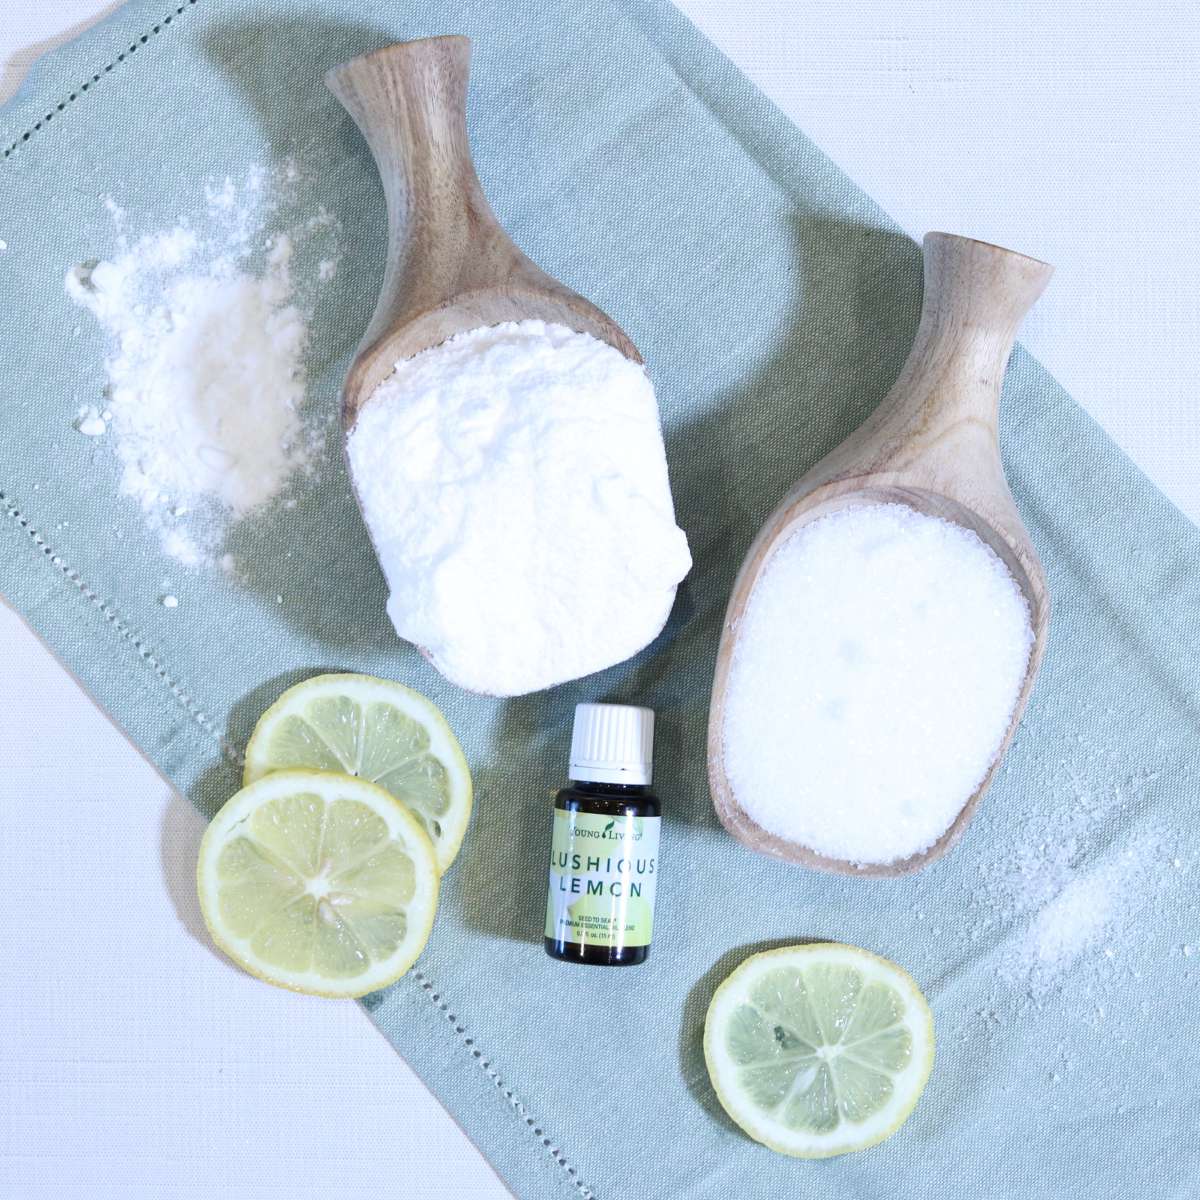 Two wooden scoops filled with epsom salt and baking soda powder for homemade laundry scent booster recipe. A bottle of lemon essential oil and lemon slices are near the wooden scoops.